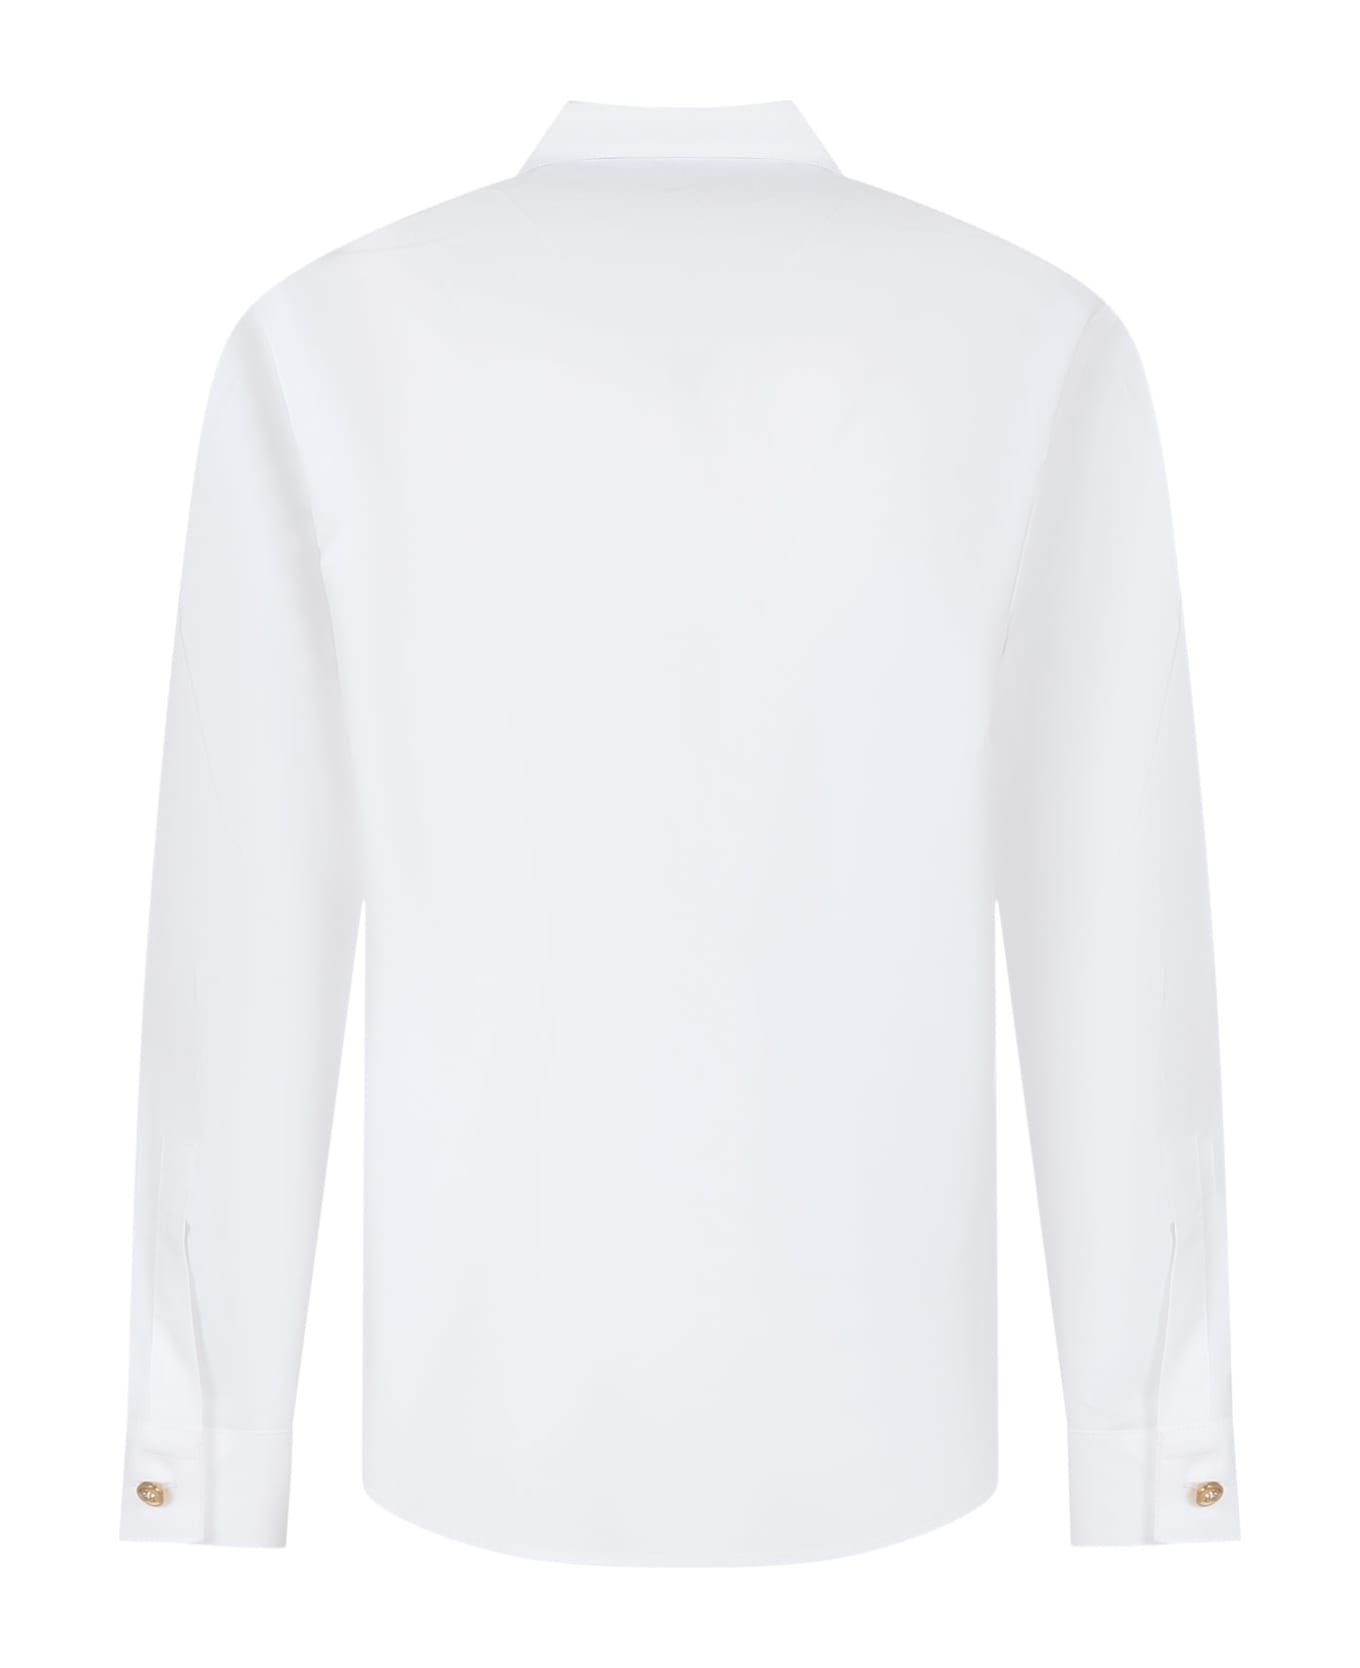 Versace White Shirt For Boy With Medusa - White